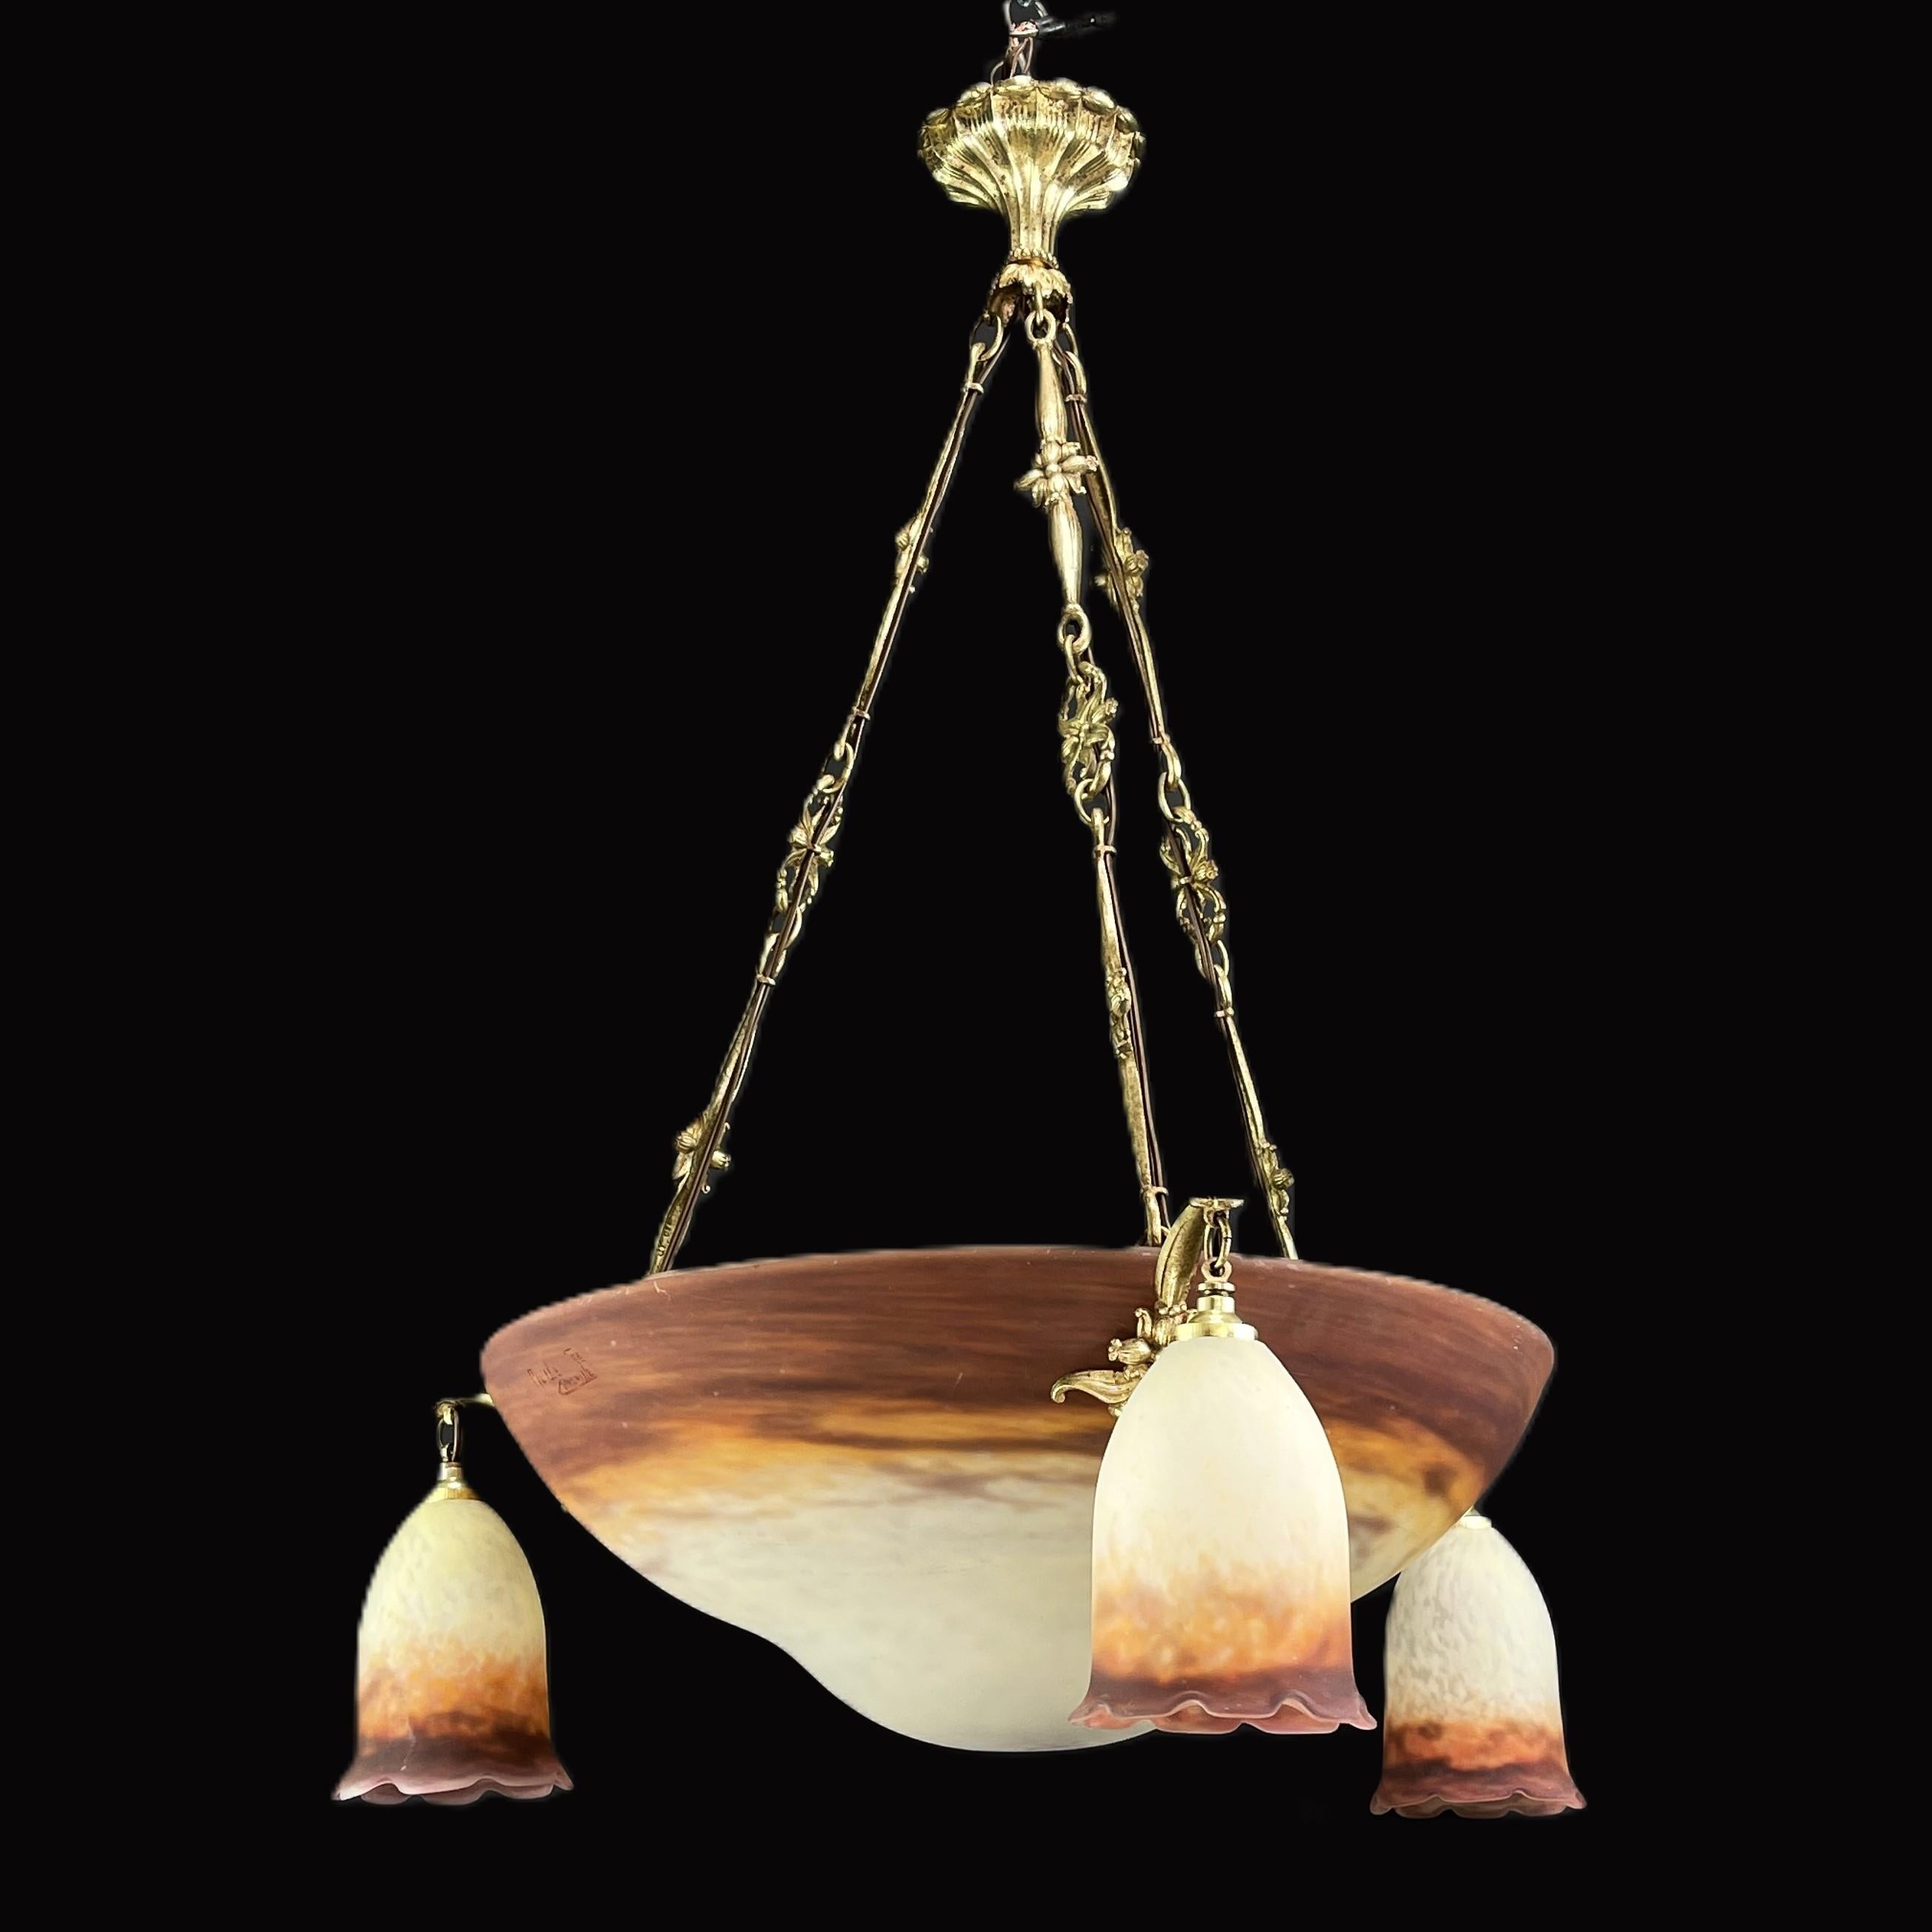 Art-Déco-Kronleuchter by Muller Freres Luneville

The ART DECO ceiling lamp is a remarkable example of the craftsmanship and style of the early 20th century. 

The signature ‘Muller Frerés’ on this ceiling lamp is a sign of the outstanding